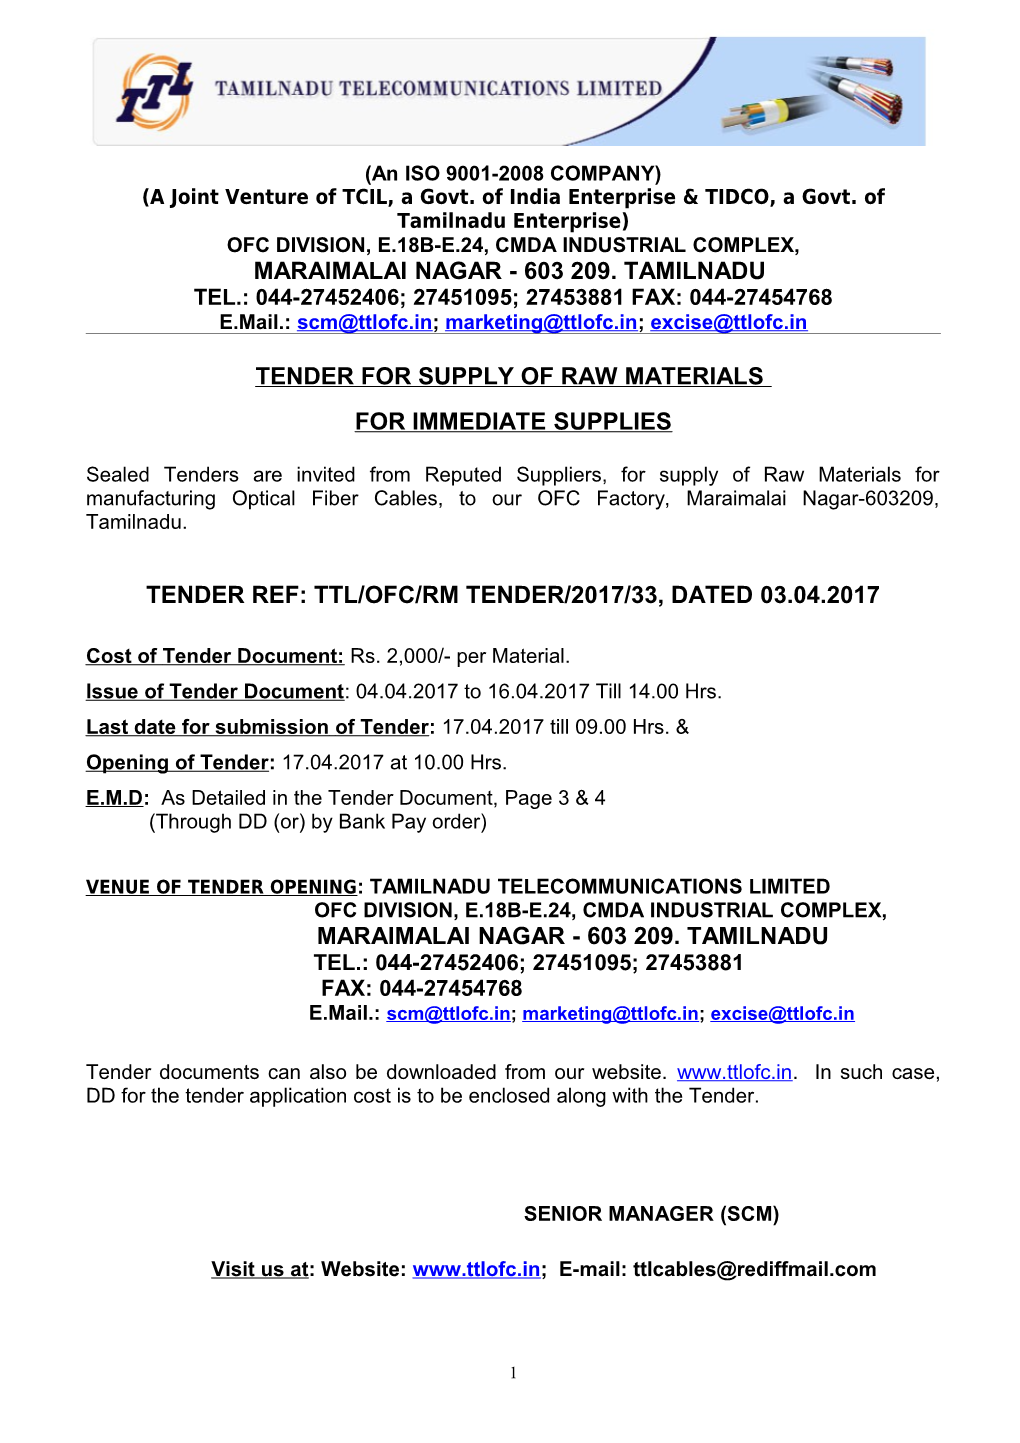 Tender for Raw Material